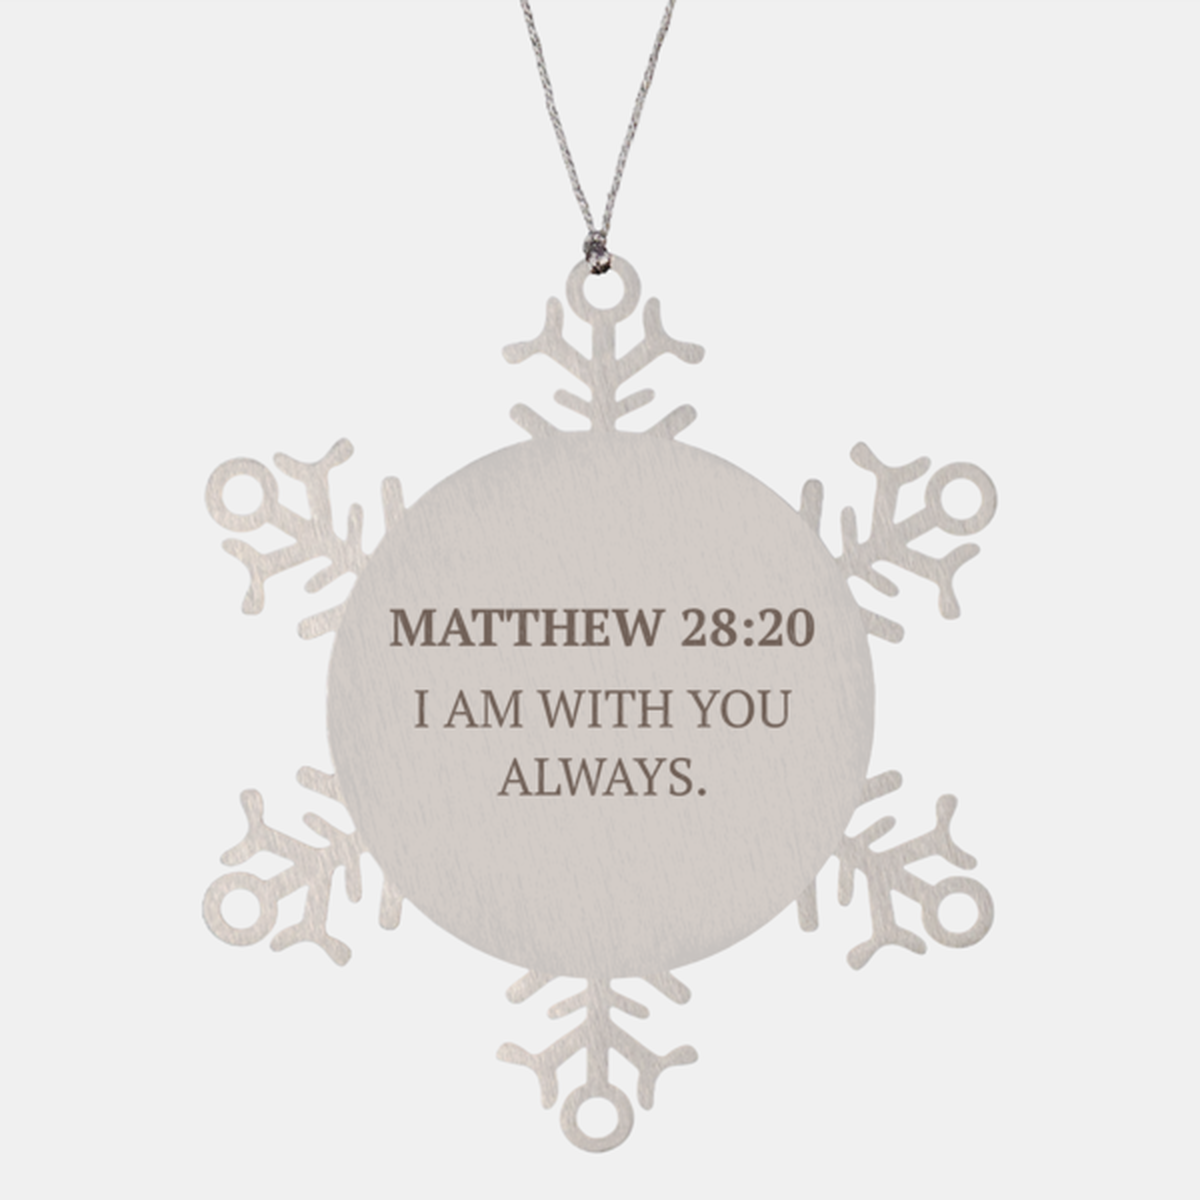 Christian Ornaments For Christmas Tree, I Am With You Always, Religious Christmas Decorations, Scripture Ornaments Gifts, Bible Verse Ornament